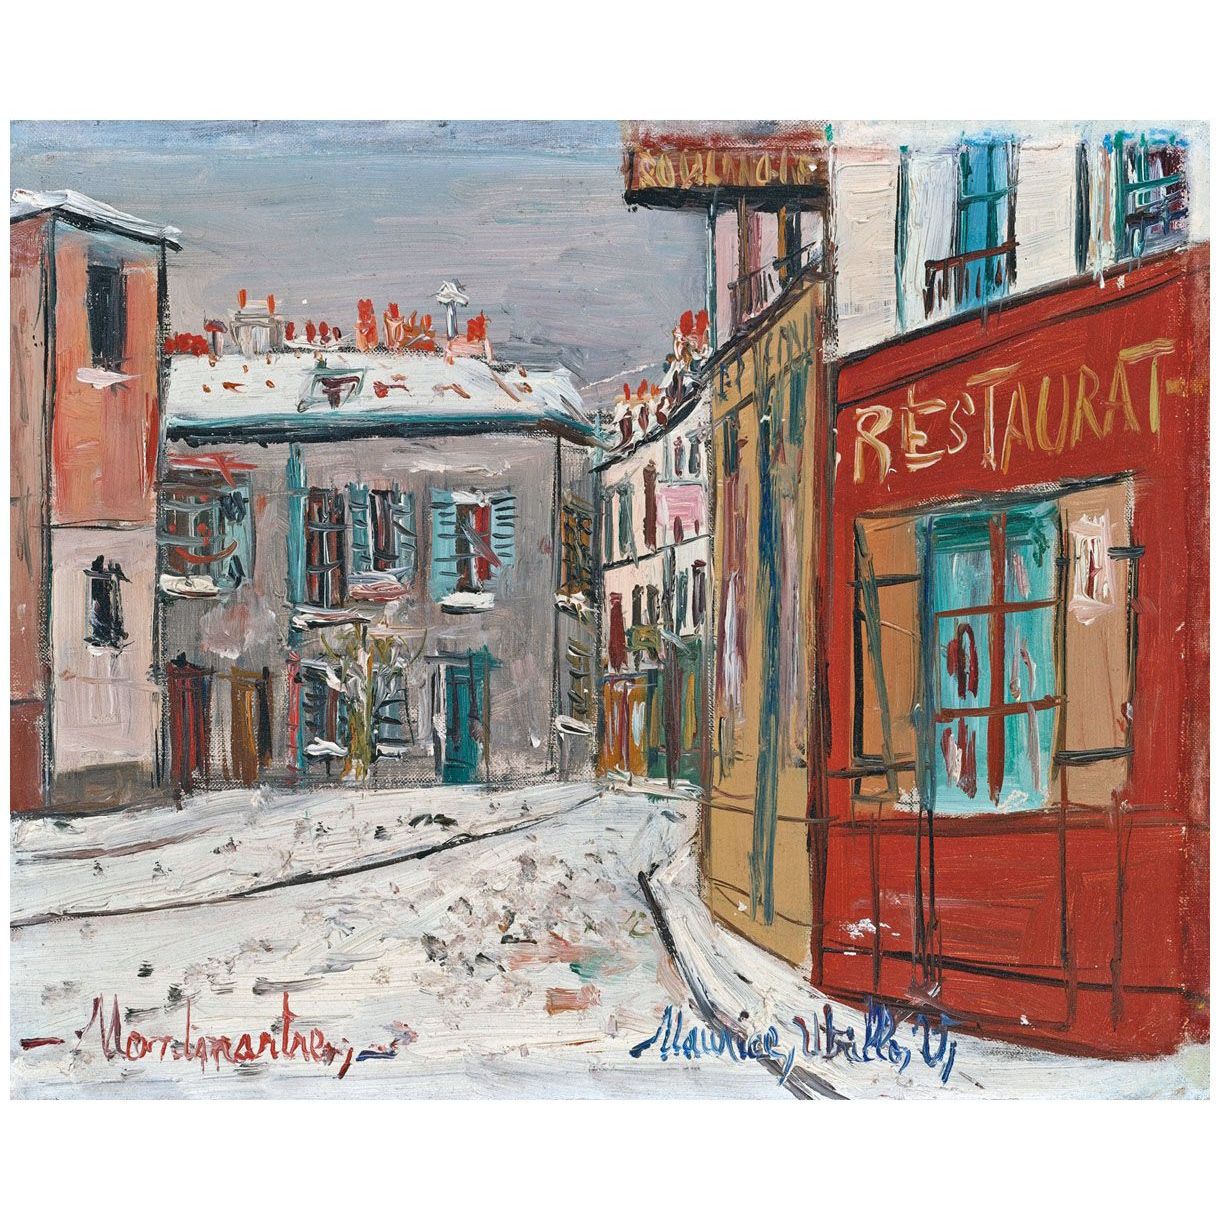 Maurice Utrillo. Rue Norvins a Montmartre. 1941. Private collection